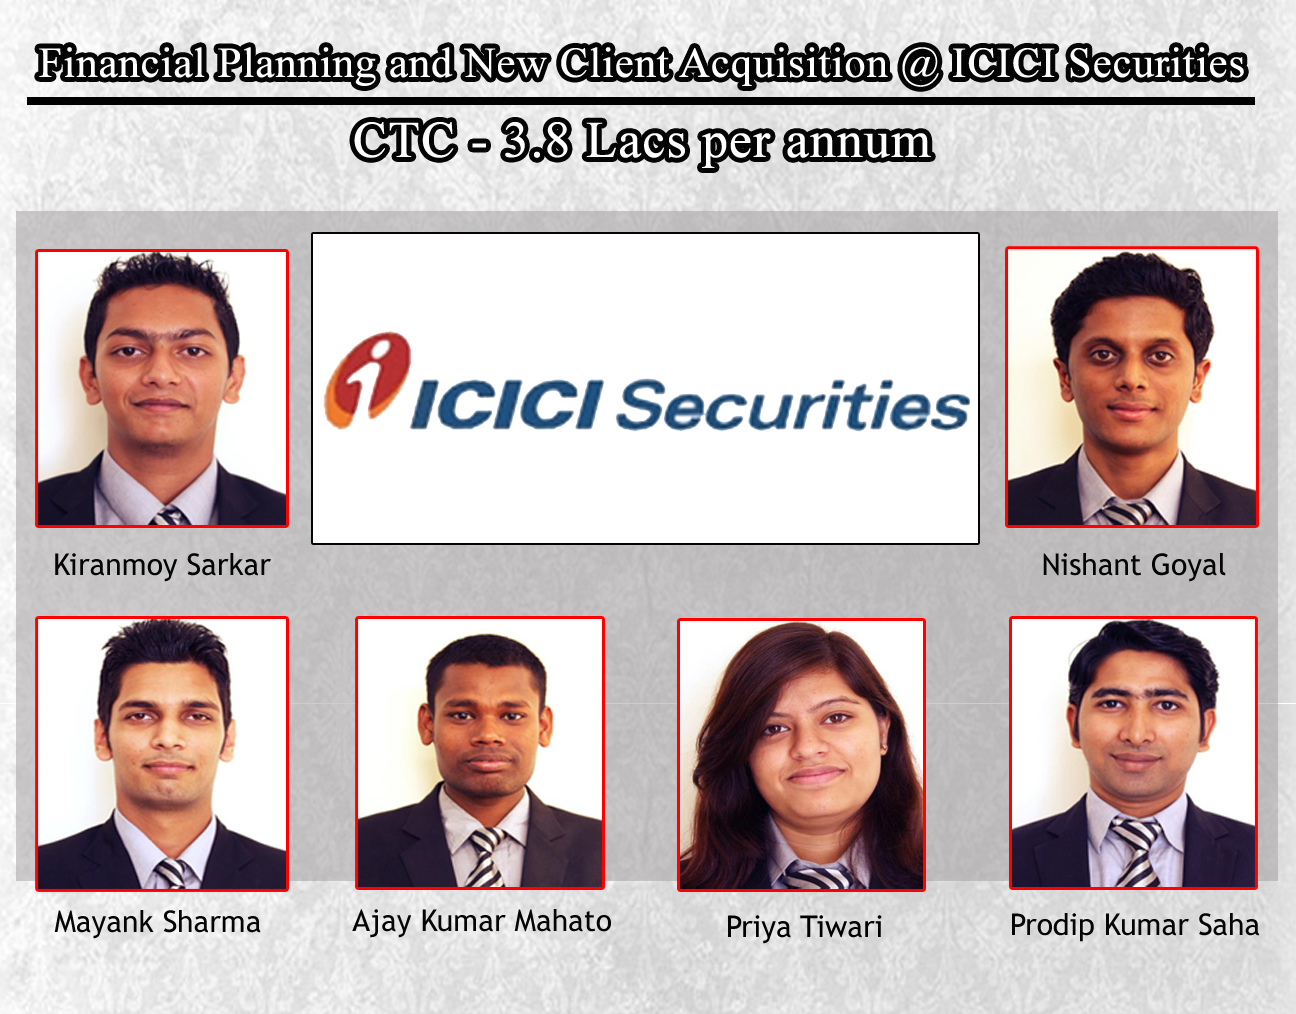 Financial Planning and New Client Acquisition @ ICICI Securities